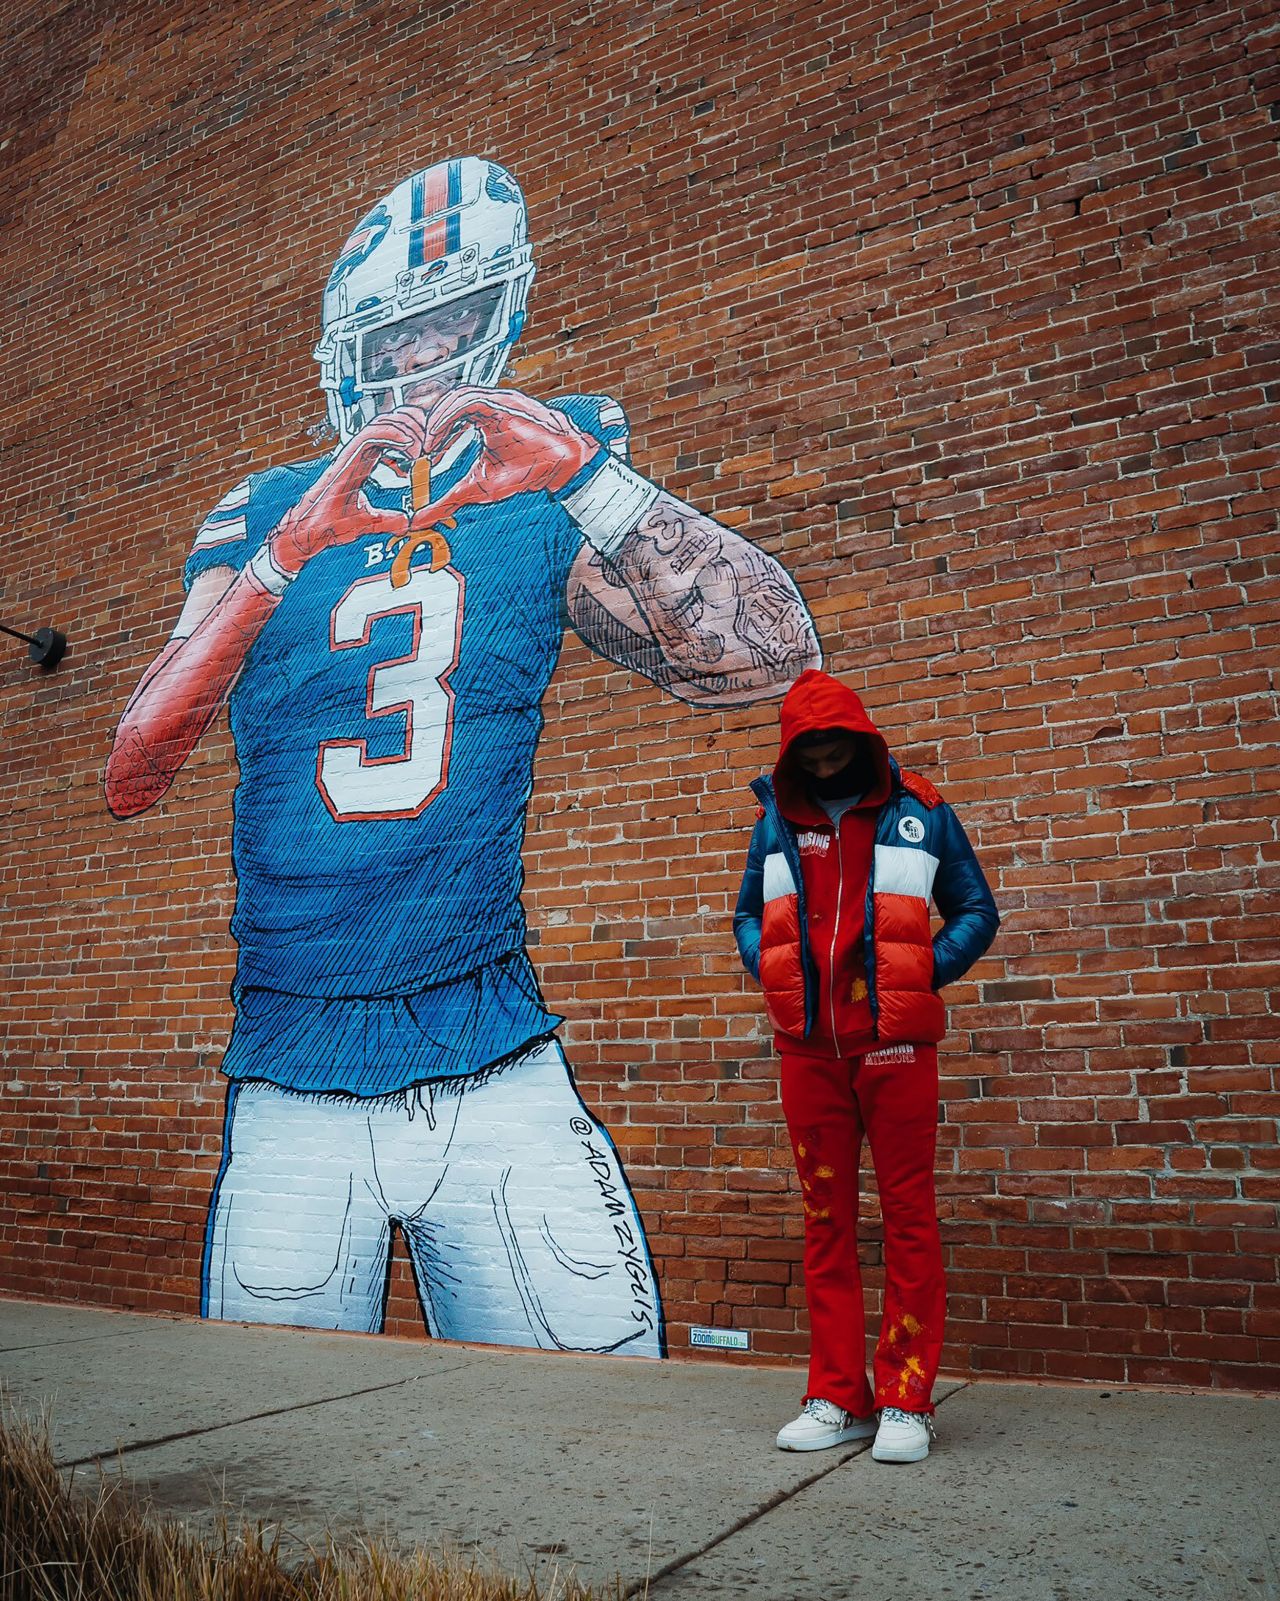 NFL football player Damar Hamlin <a href="https://twitter.com/HamlinIsland/status/1617678293876224002" target="_blank" target="_blank">tweeted this photo</a> of him standing in front of his mural in Buffalo, New York, on Monday, January 23. Hamlin suffered cardiac arrest and collapsed on the field during a game against Cincinnati on January 2.